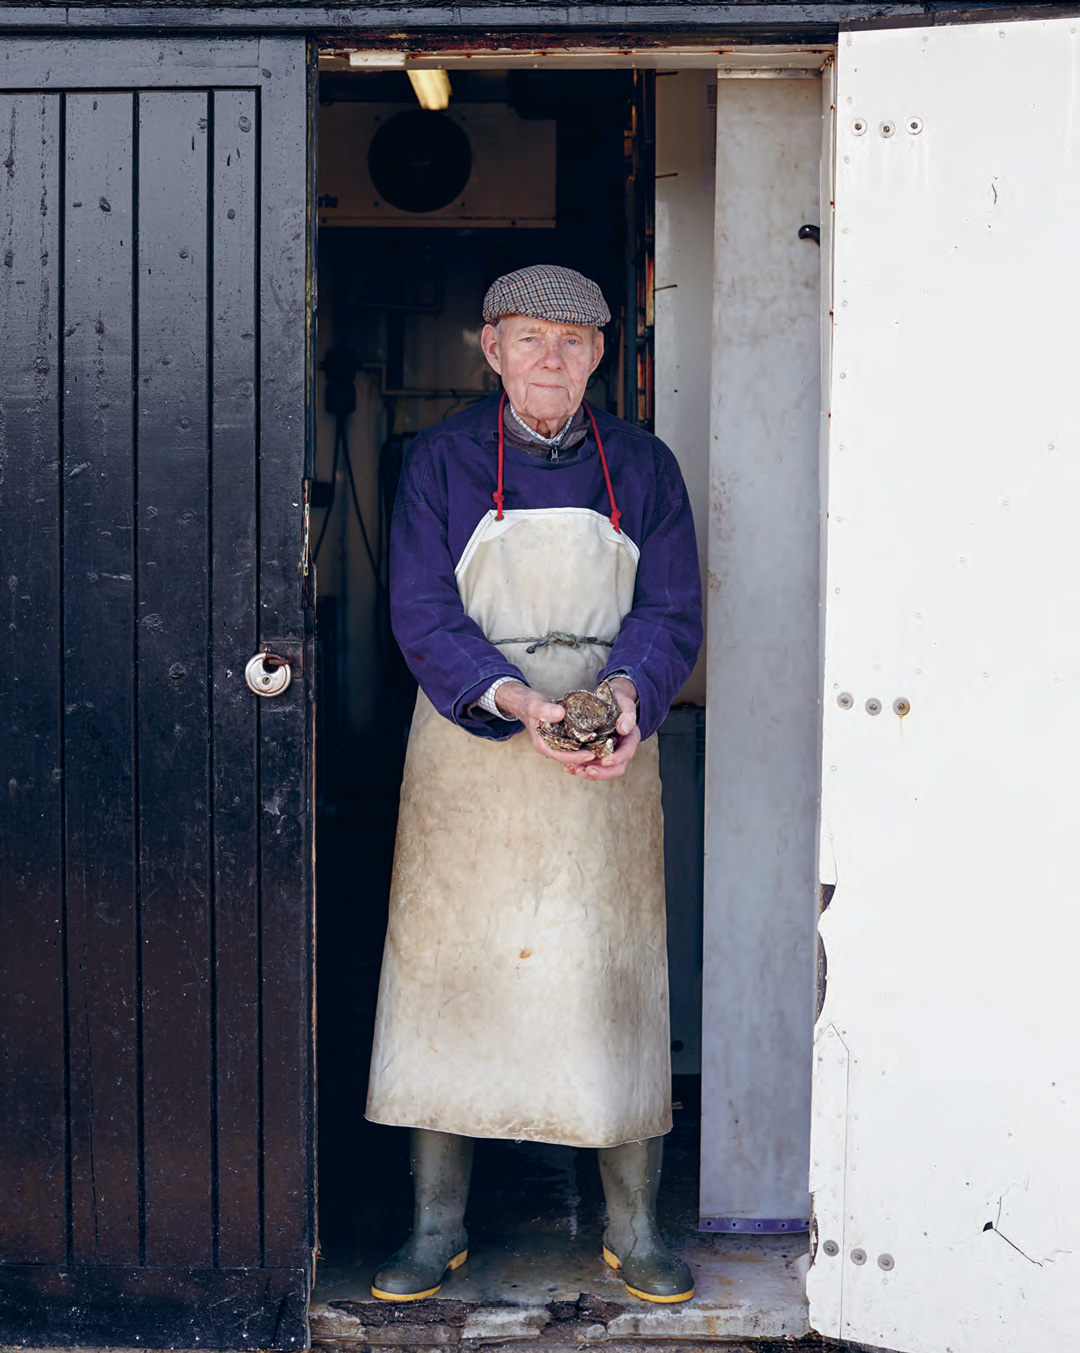 A local oyster producer, as featured in The Sportsman. All photographs by Toby Glanville